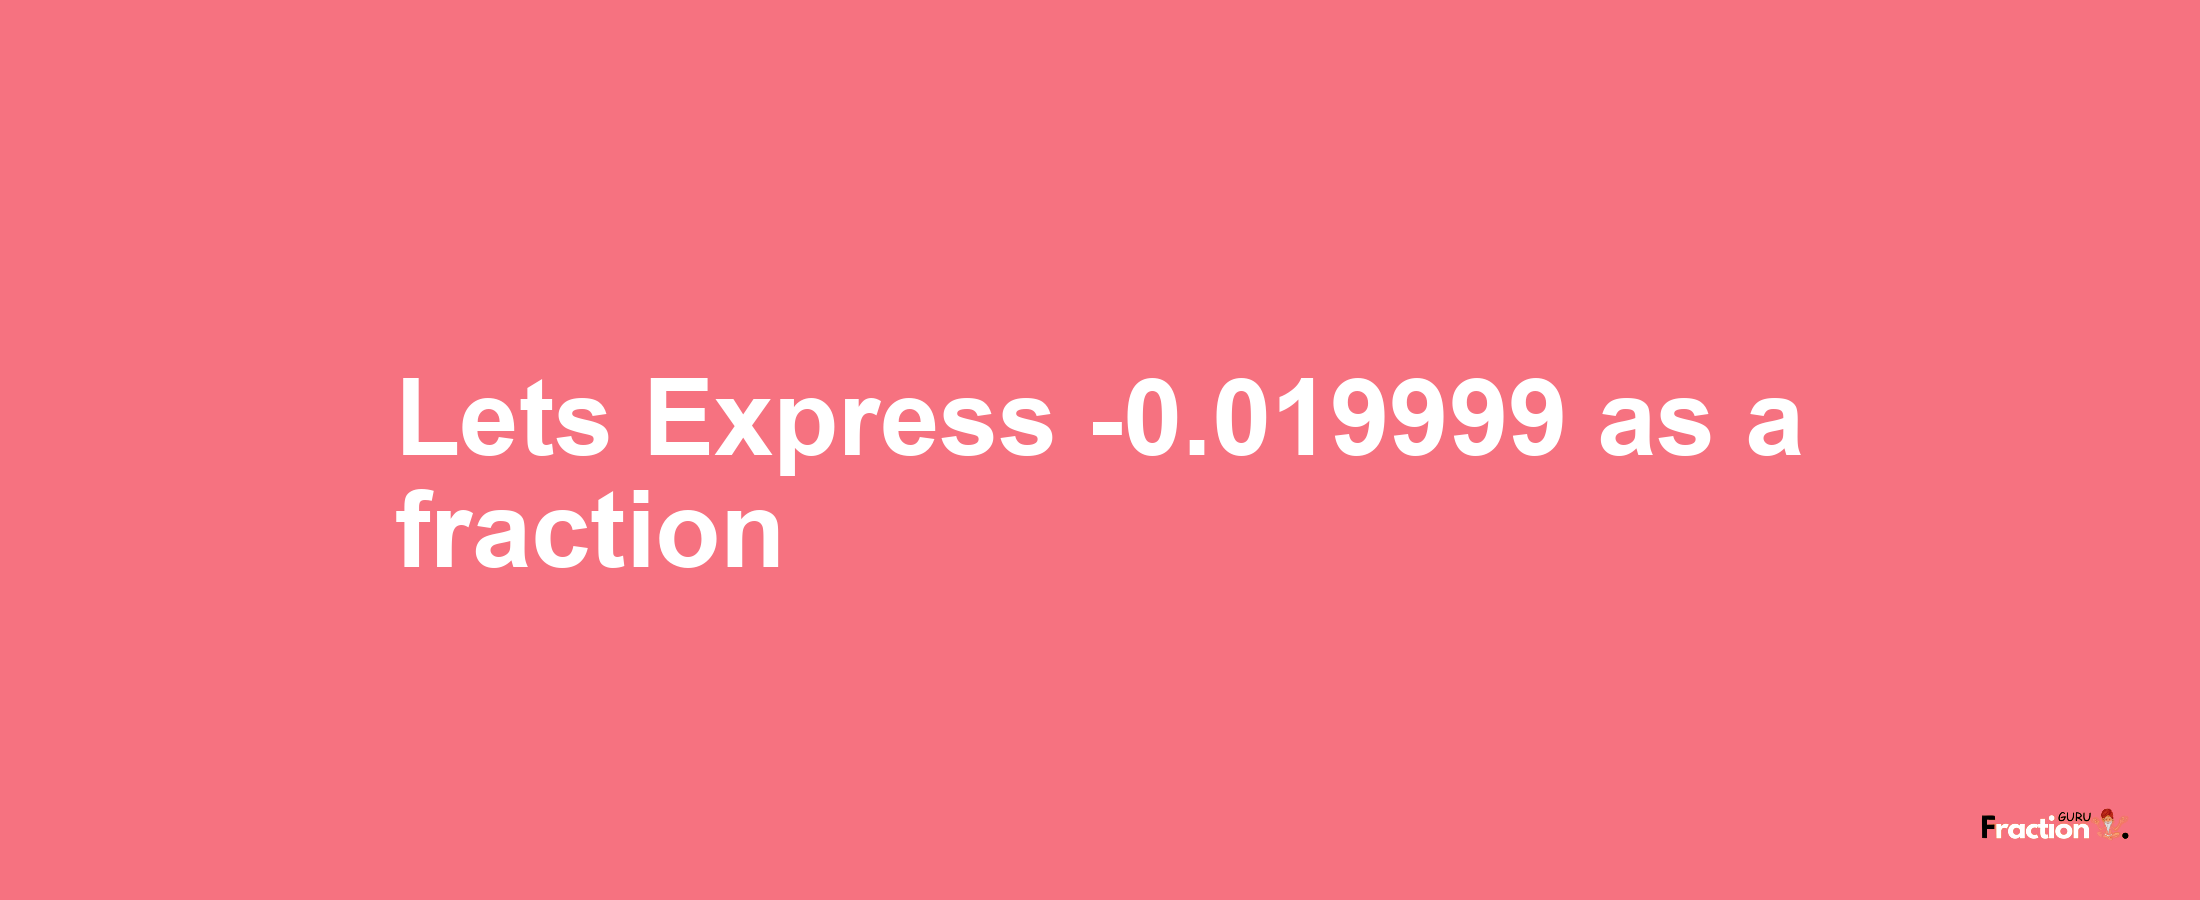 Lets Express -0.019999 as afraction